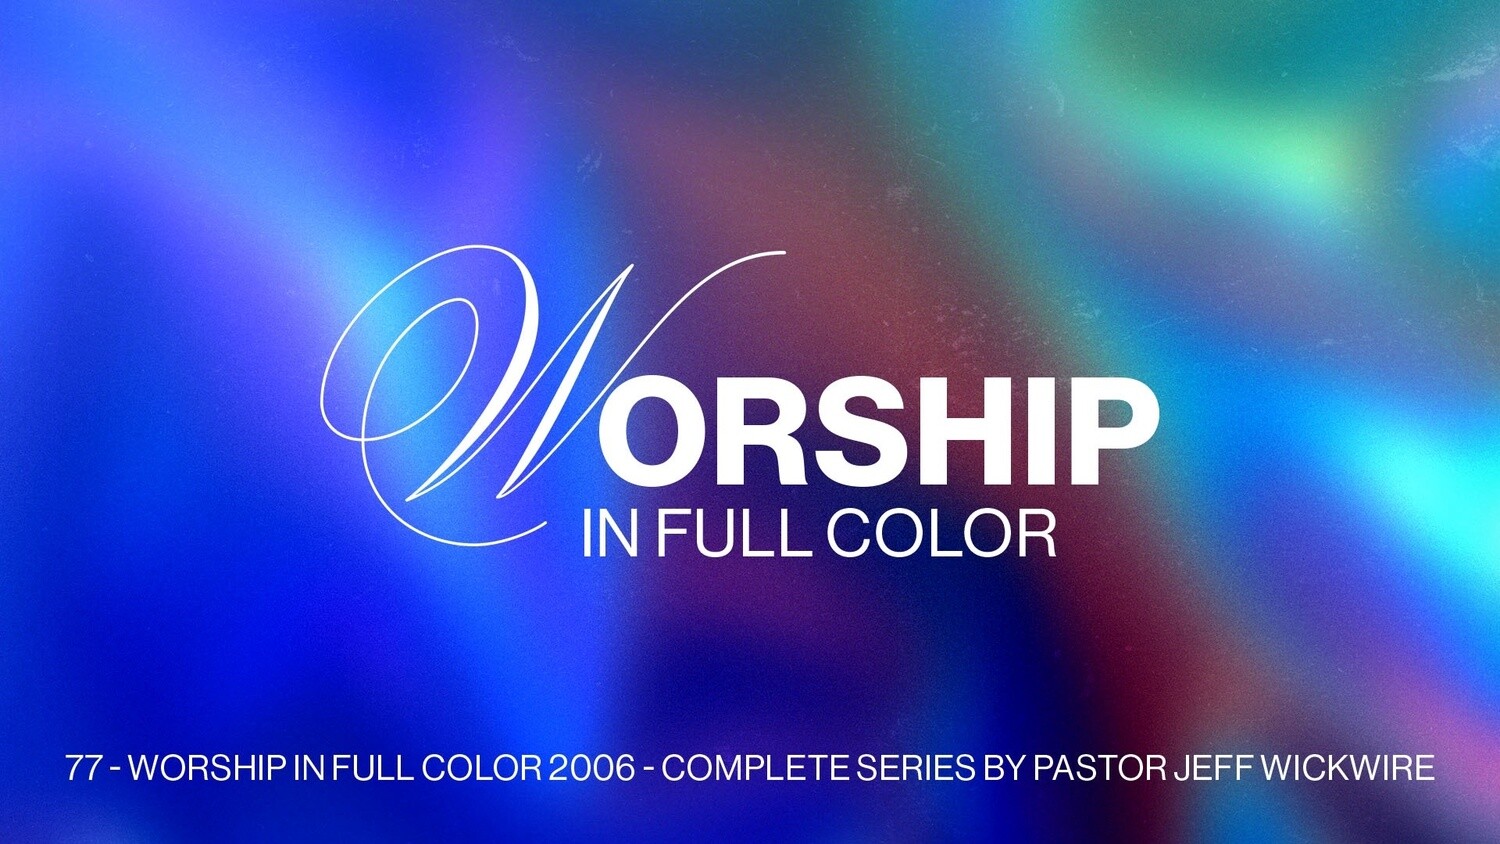 77 - Worship In Full Color 2006 - Complete Series By Pastor Jeff Wickwire